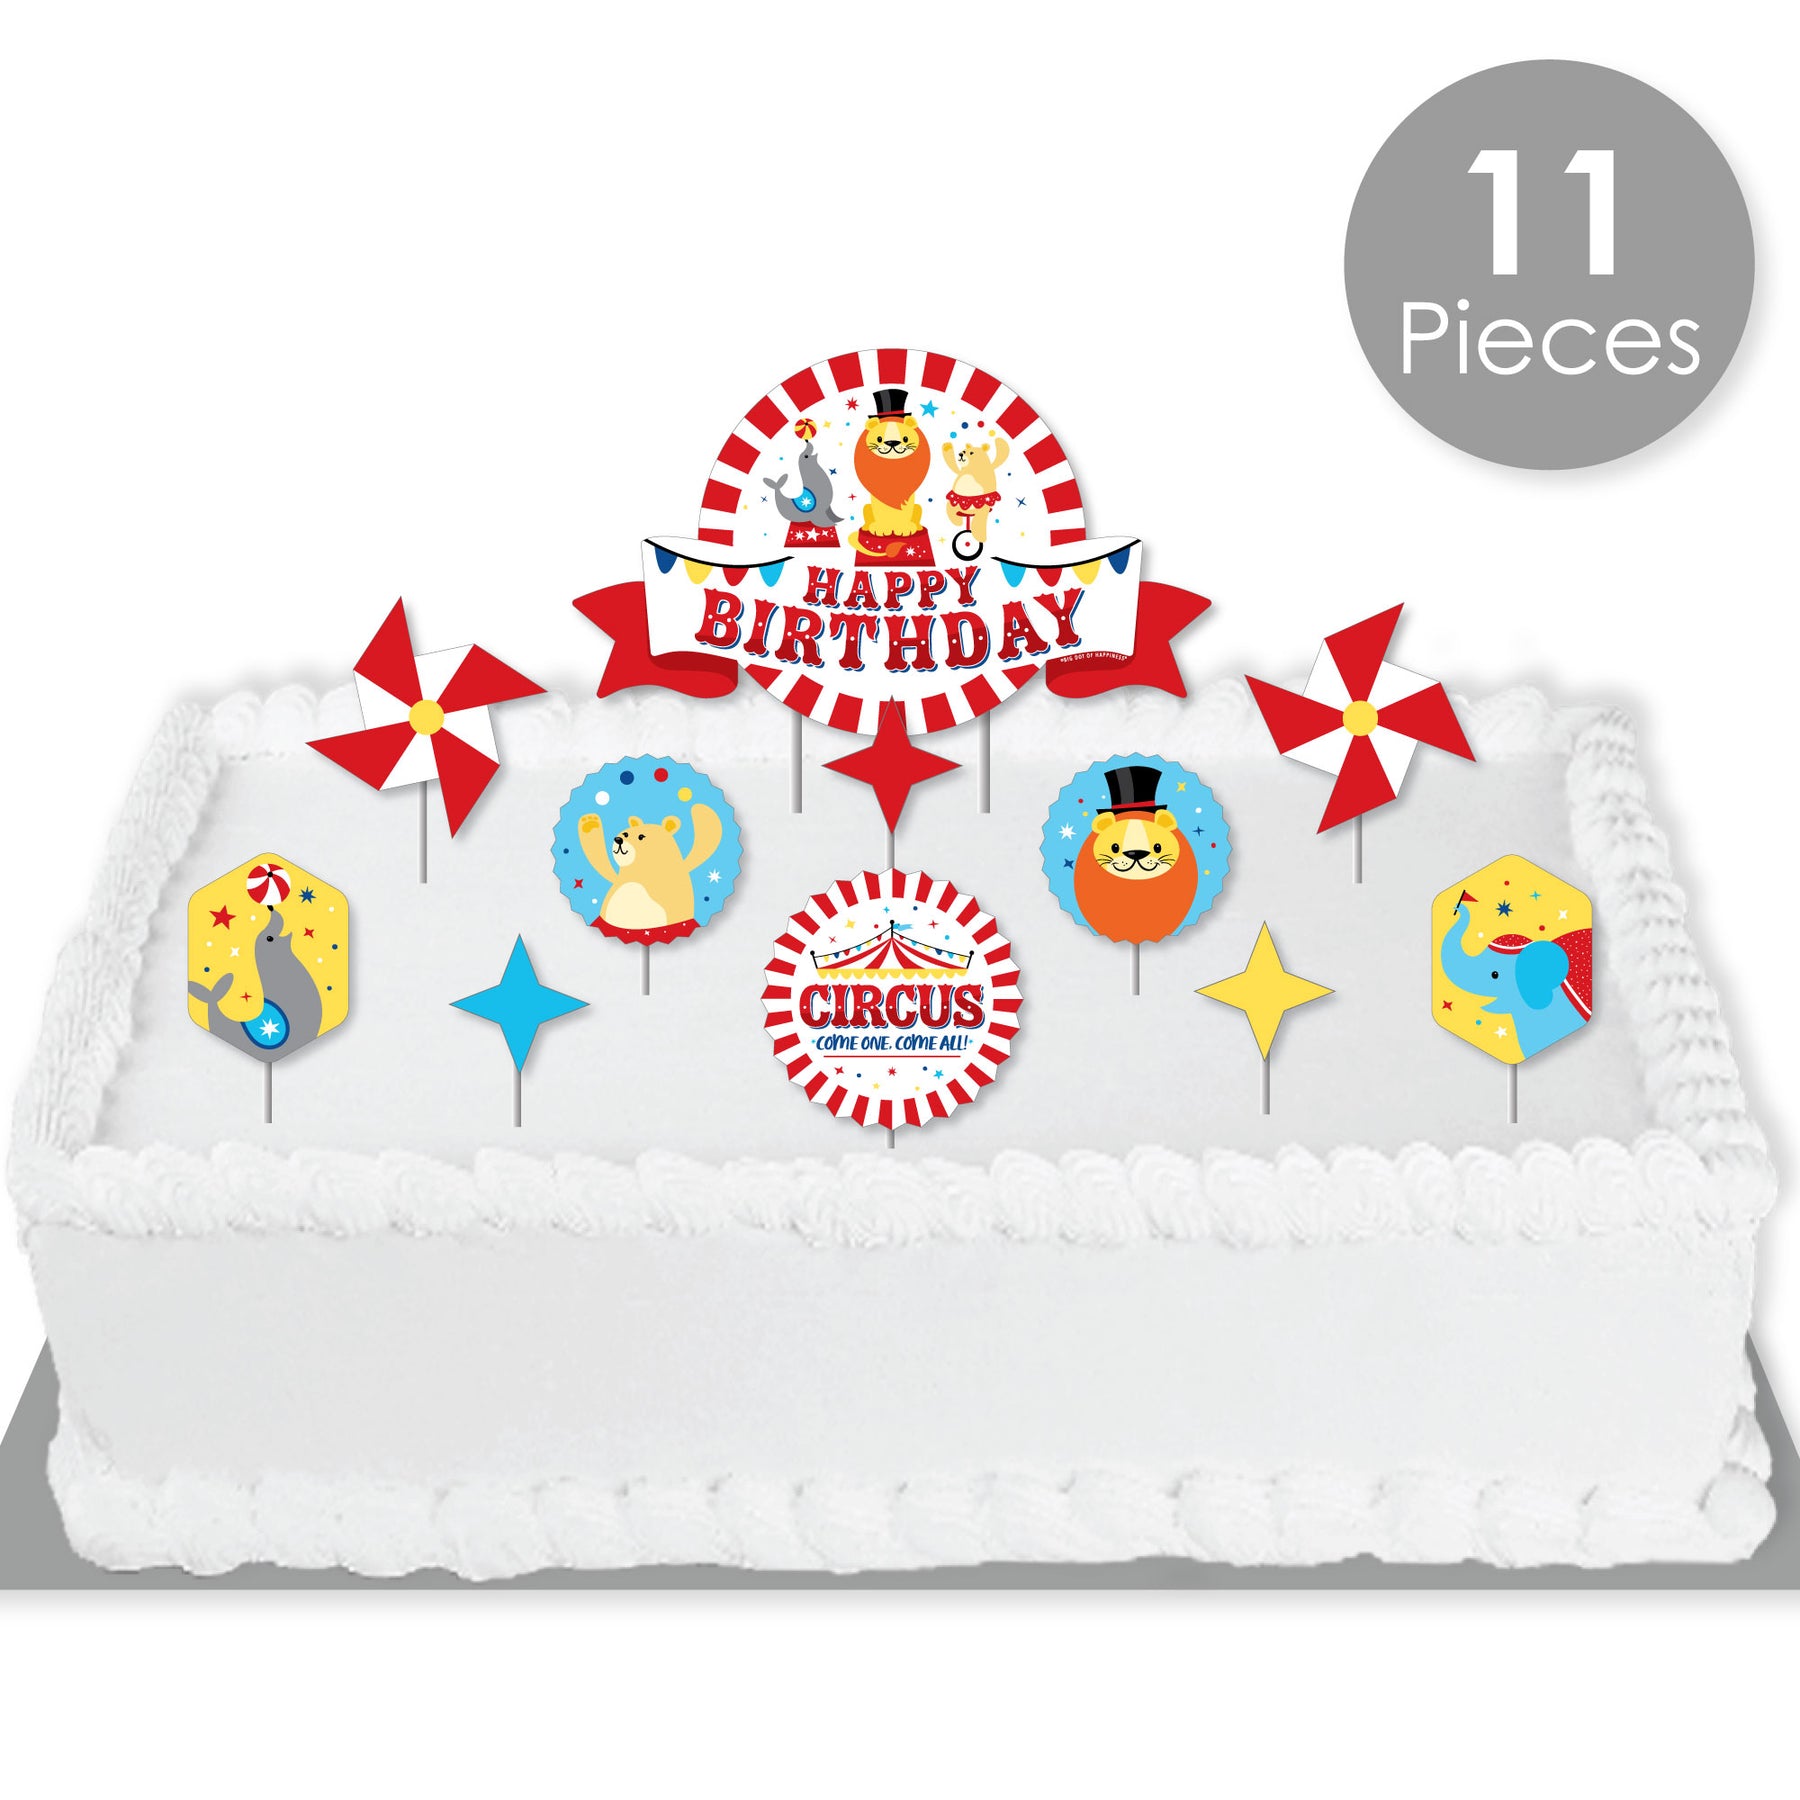 Birthday Carnival Tickets Popcorn and a Tent Edible Cake Topper Image – A  Birthday Place